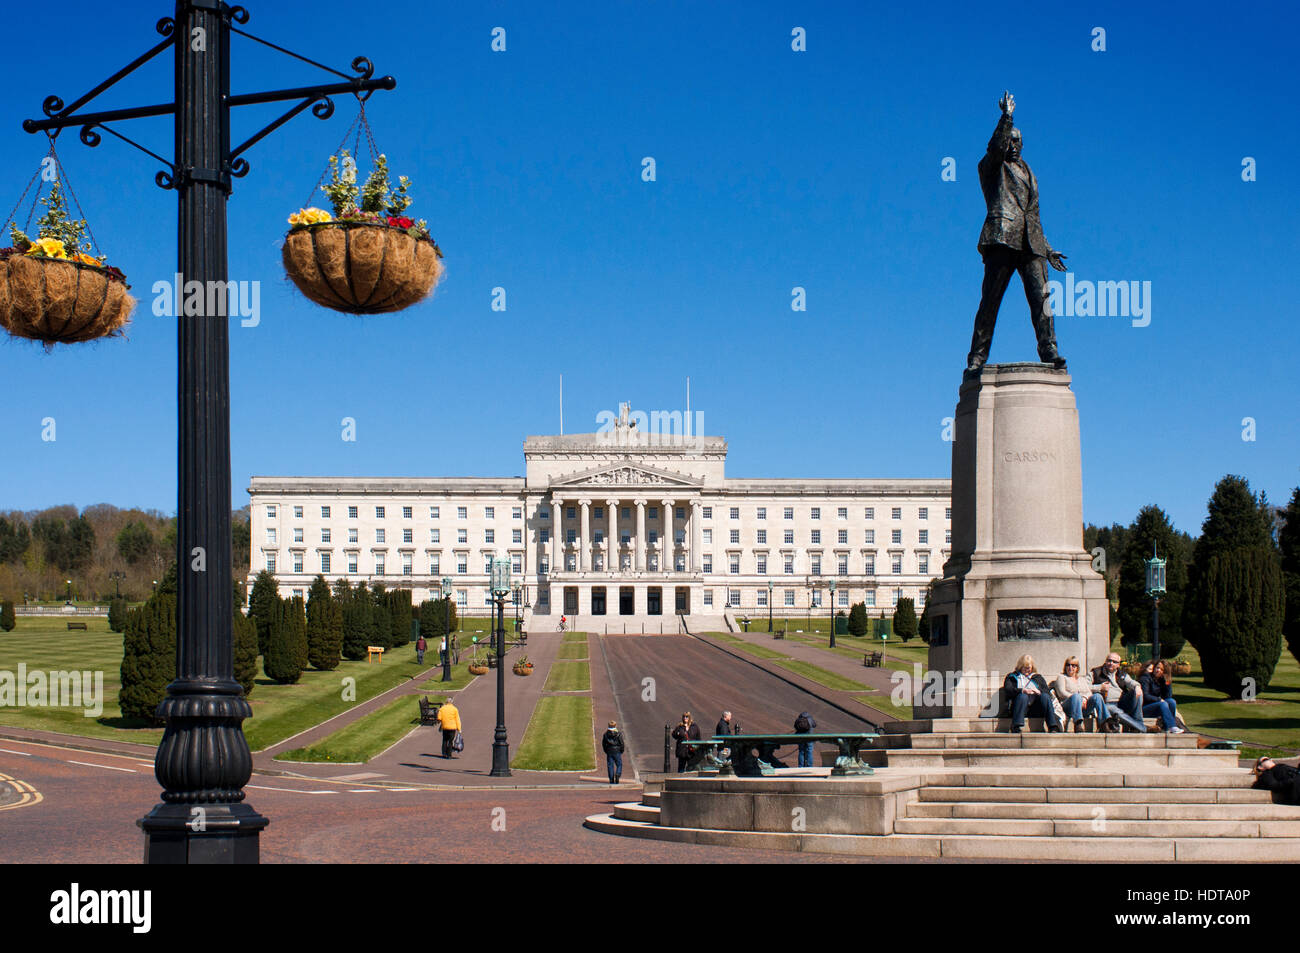 Statue Of Edward Carson In Front Of The Parliament Buildings, Belfast, Northern Ireland, UK. The Parliament Buildings, known as Stormont because of it Stock Photo